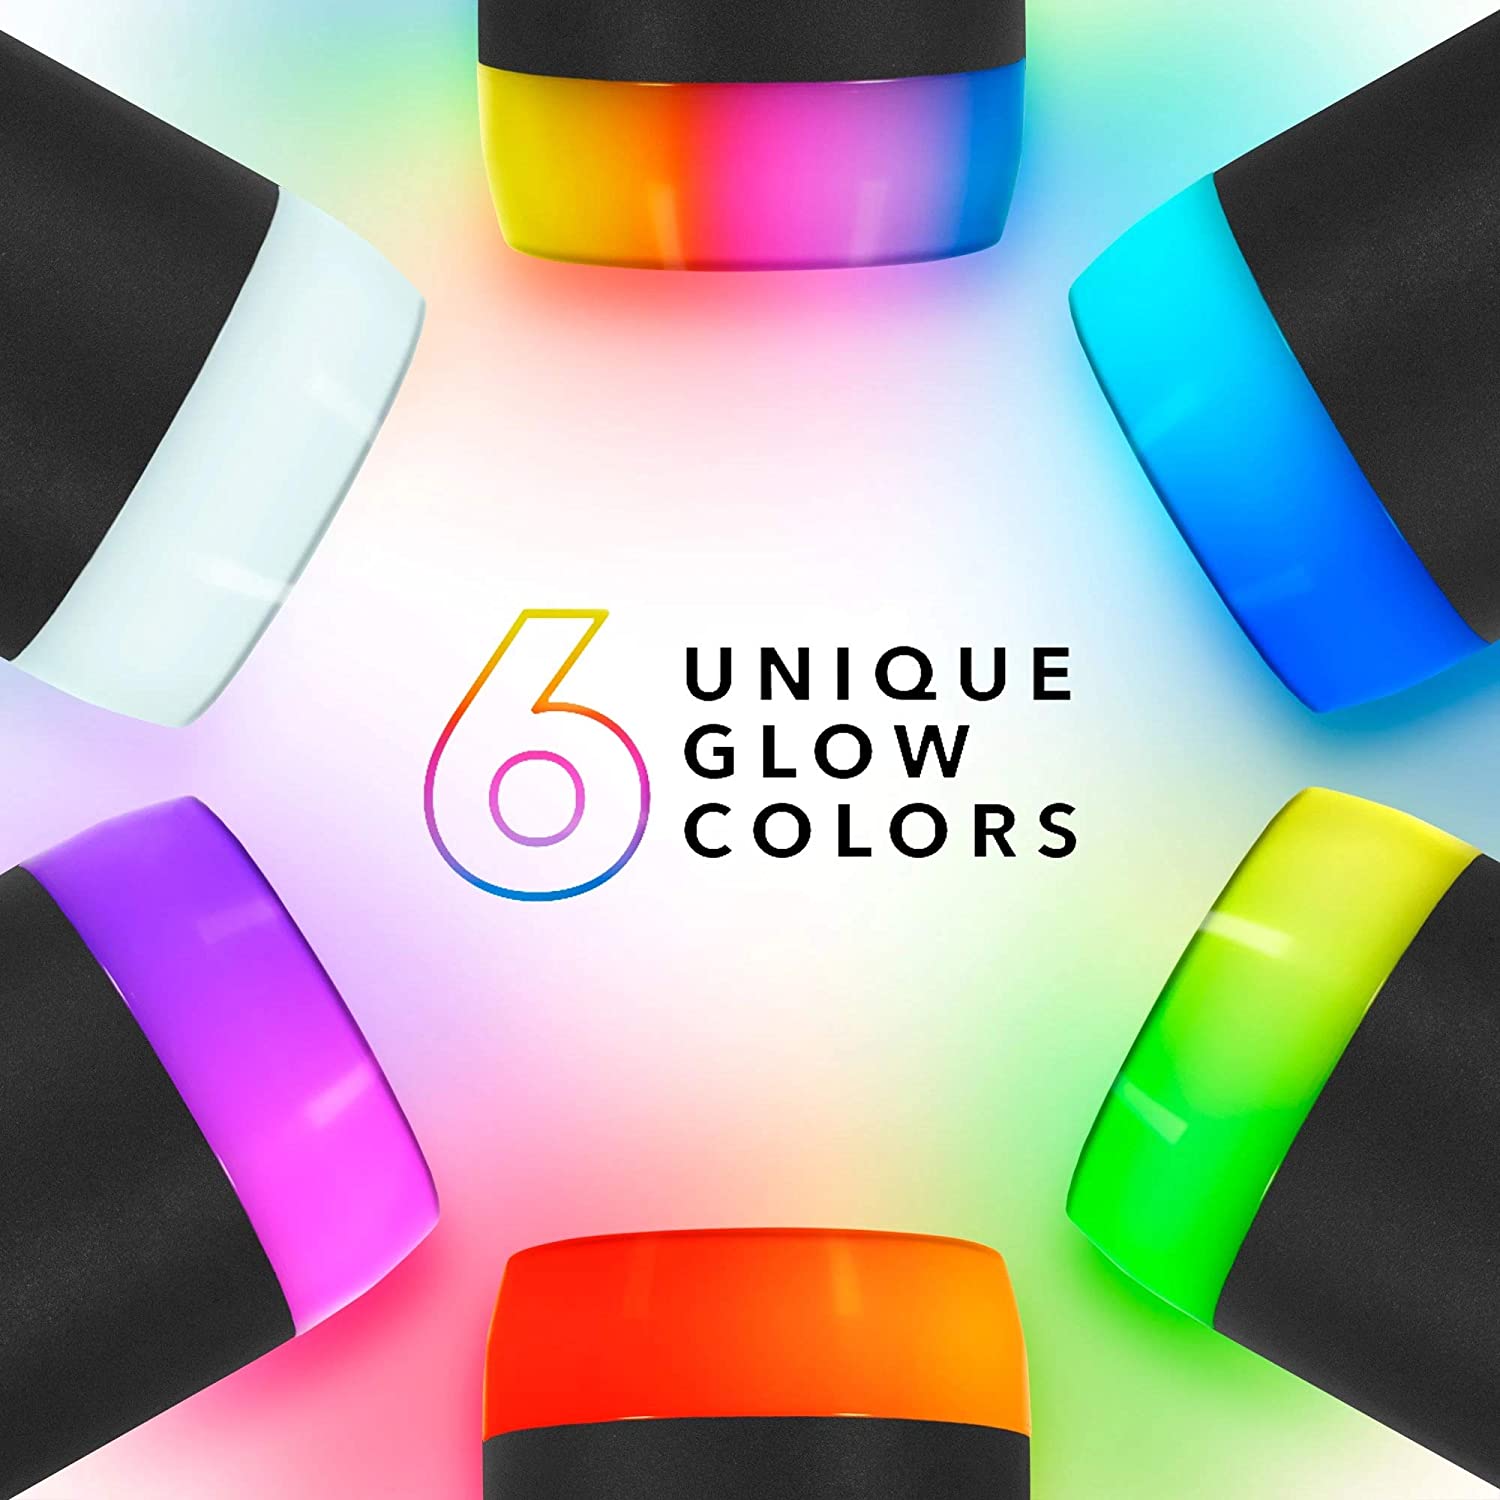 Six colorful glowing smart water bottle bases. There is text which reads, "6 unique glow colors".